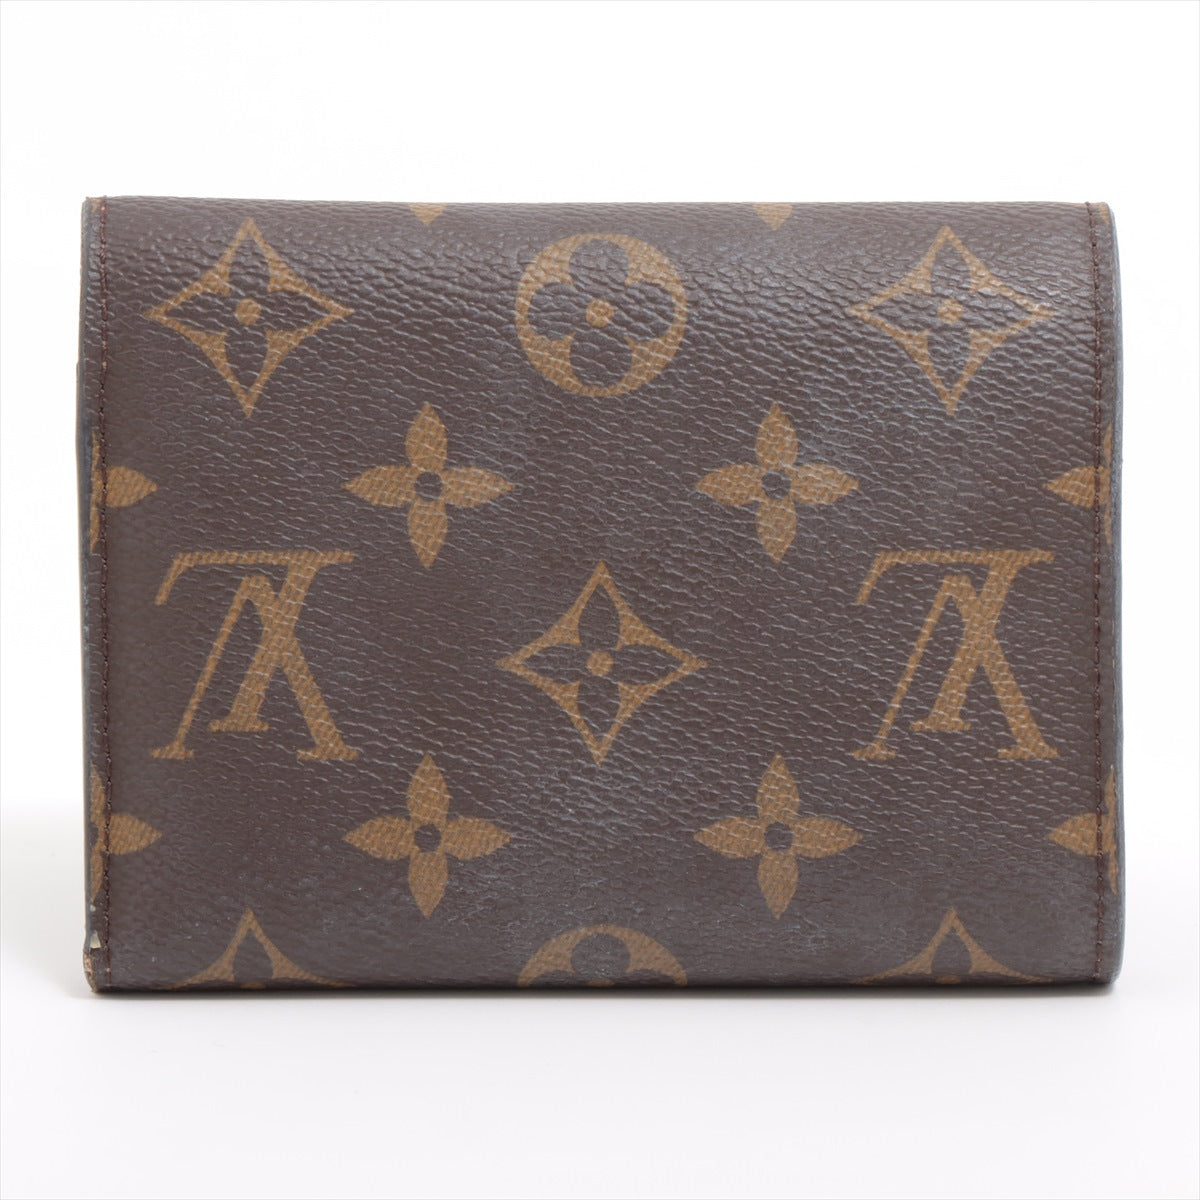 Louis Vuitton Monogram Portefeuille Victorine M62472 There was an RFID response